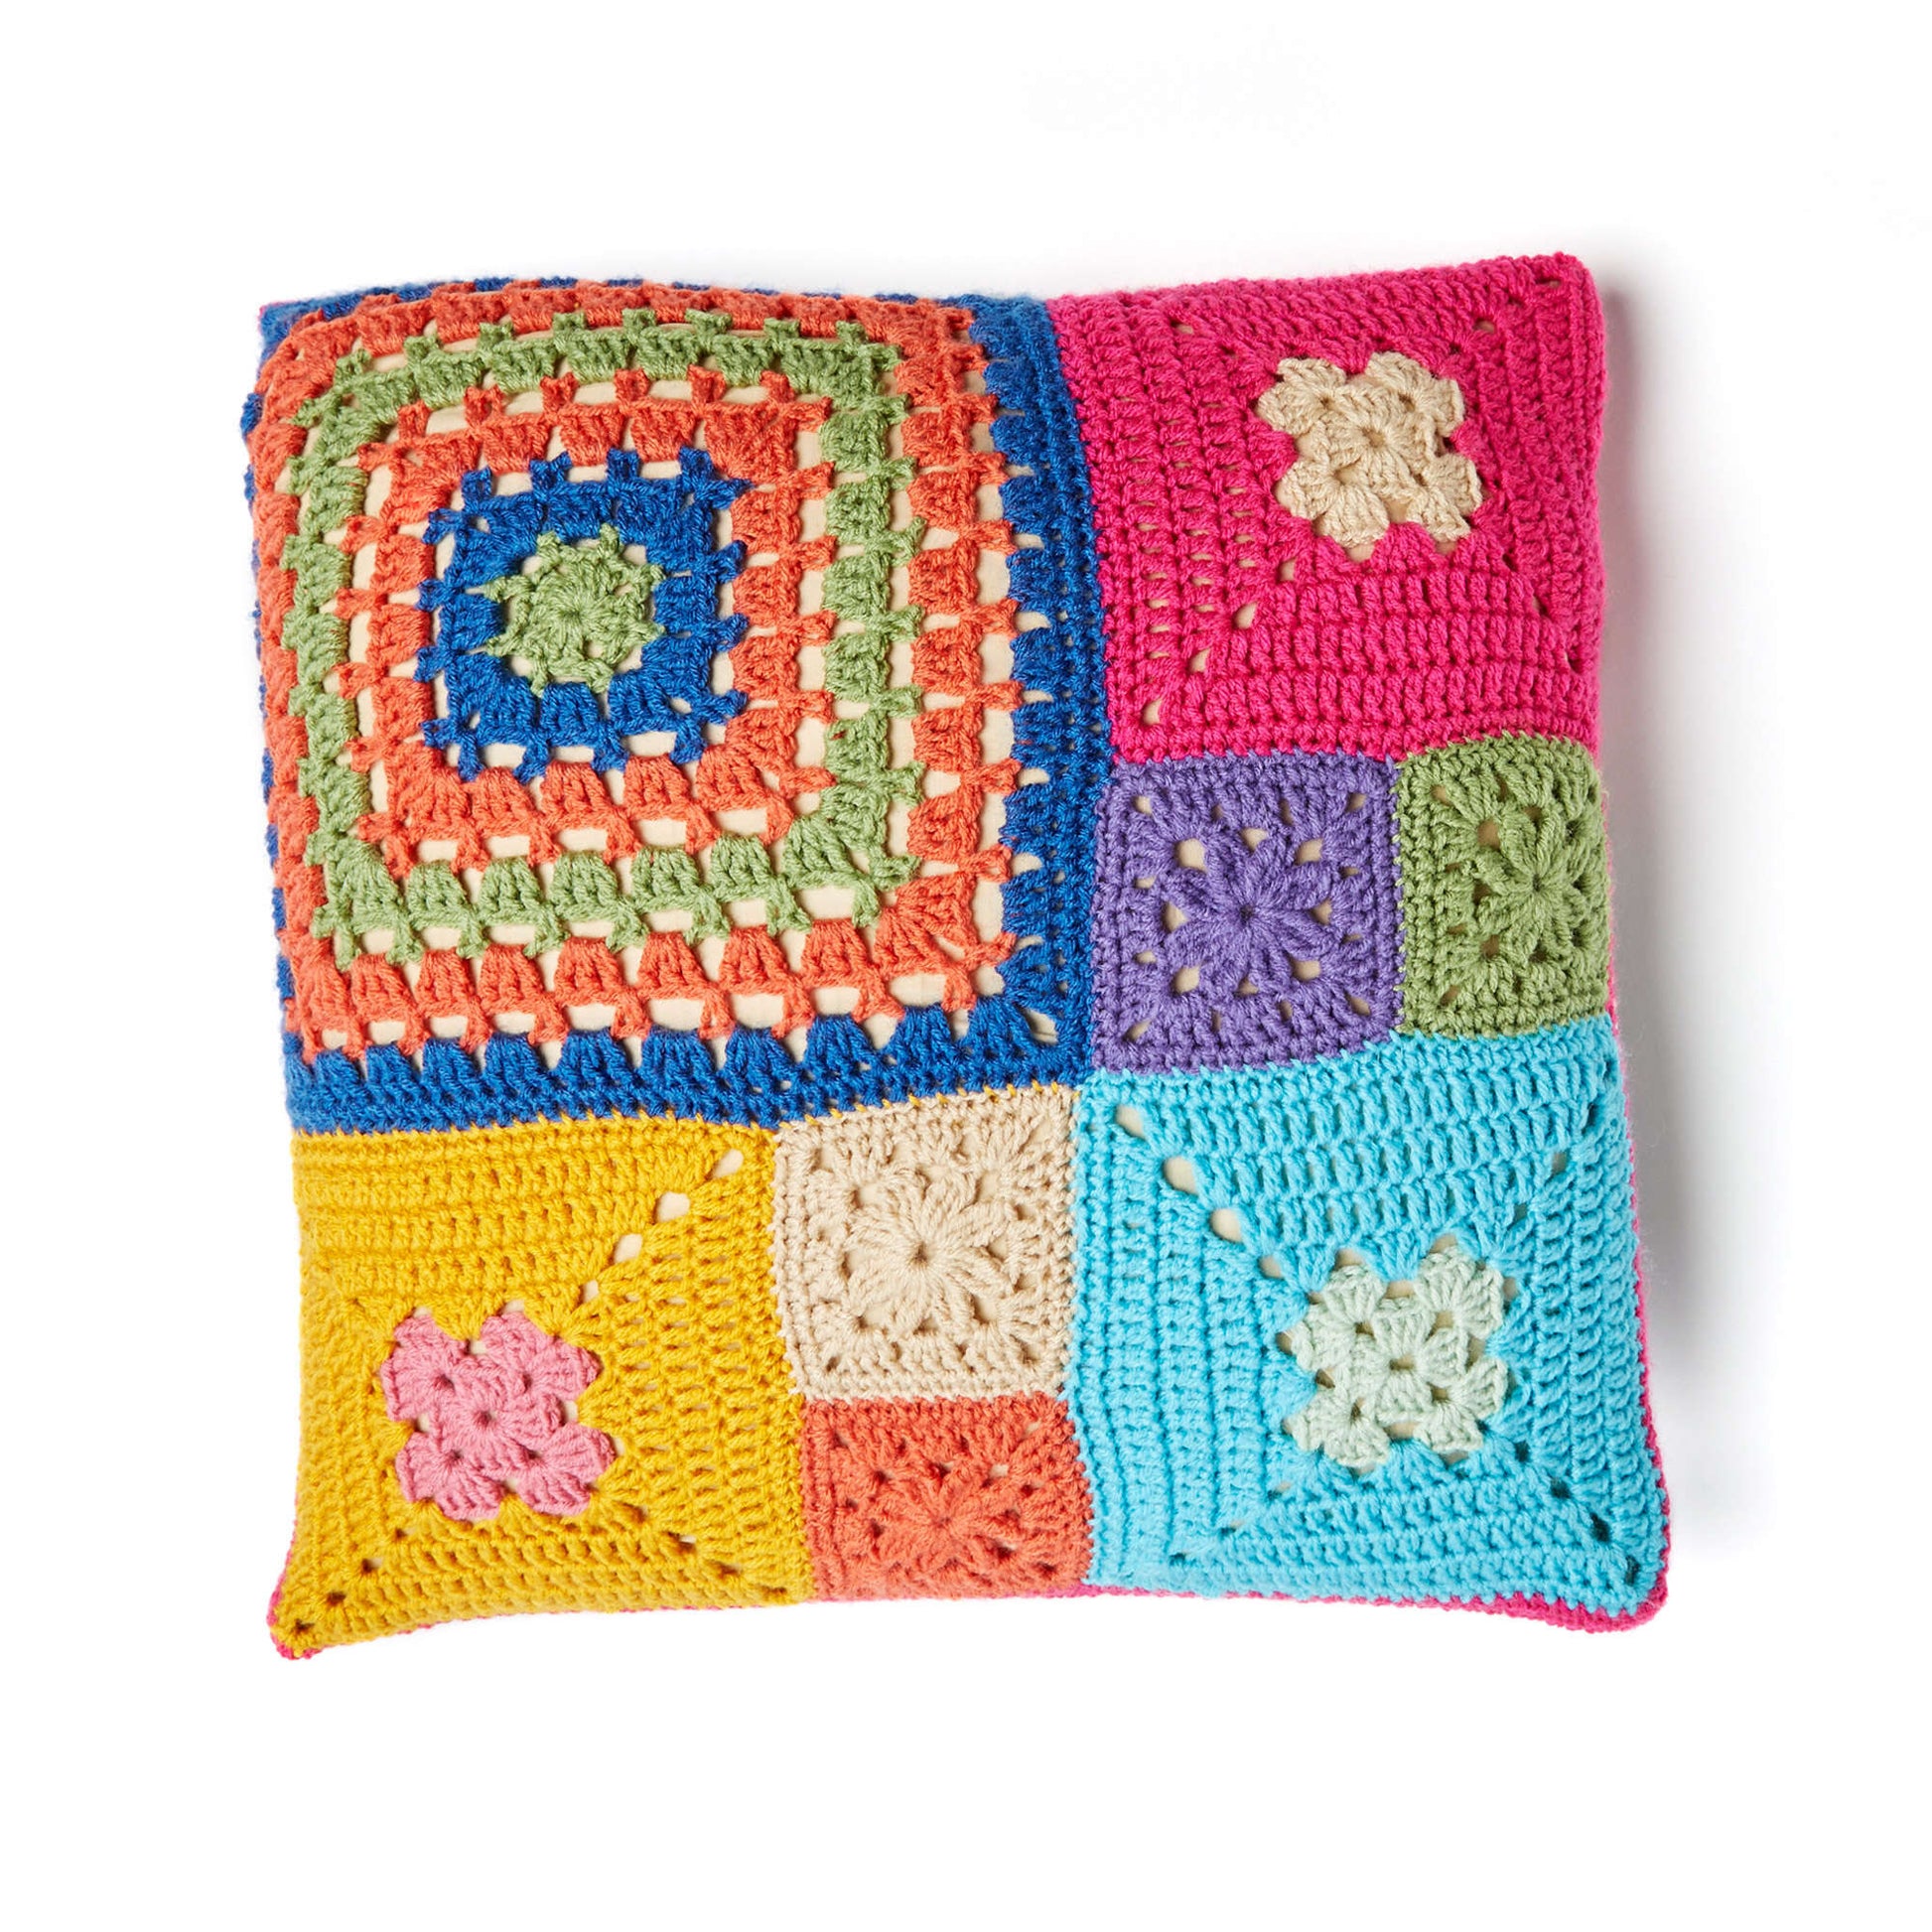 Free Red Heart Crochet Patched Persuasion Pillows Pattern